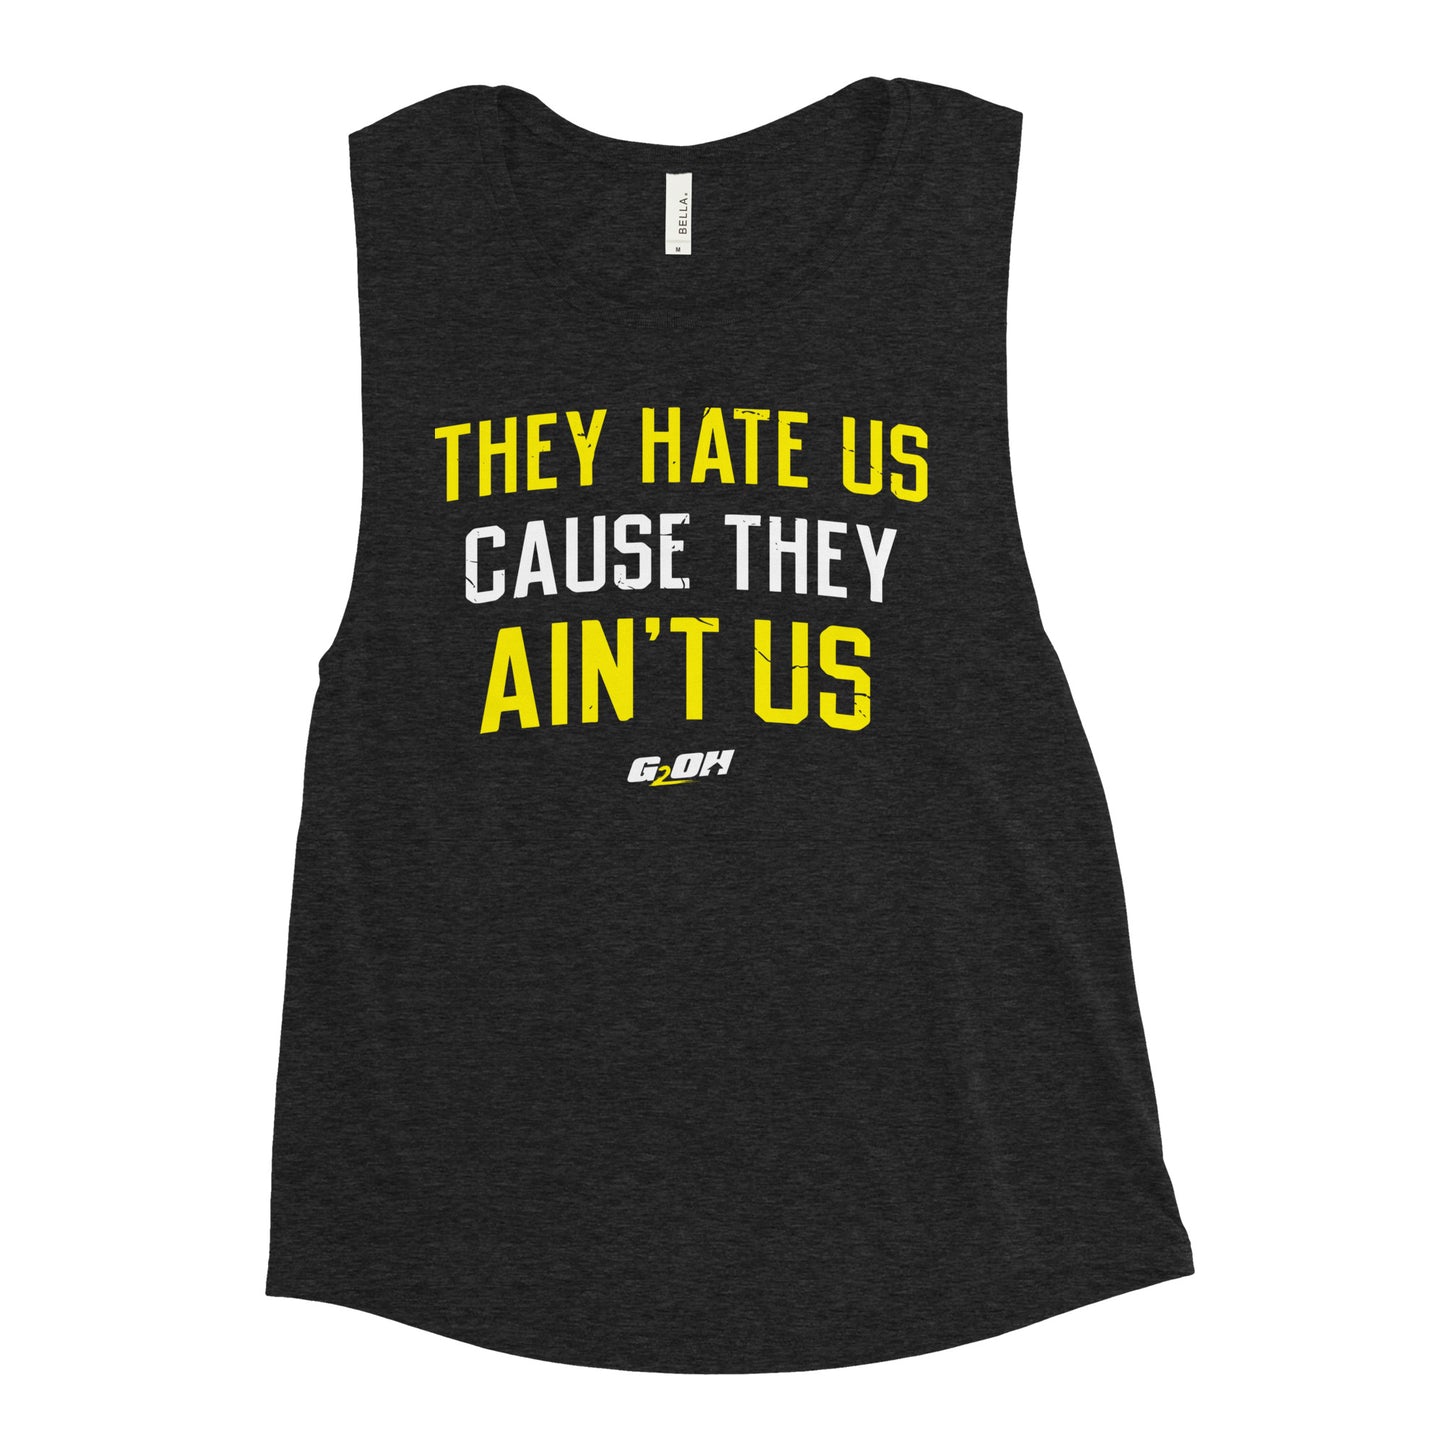 They Hate Us Cause They Ain't Us Women's Muscle Tank